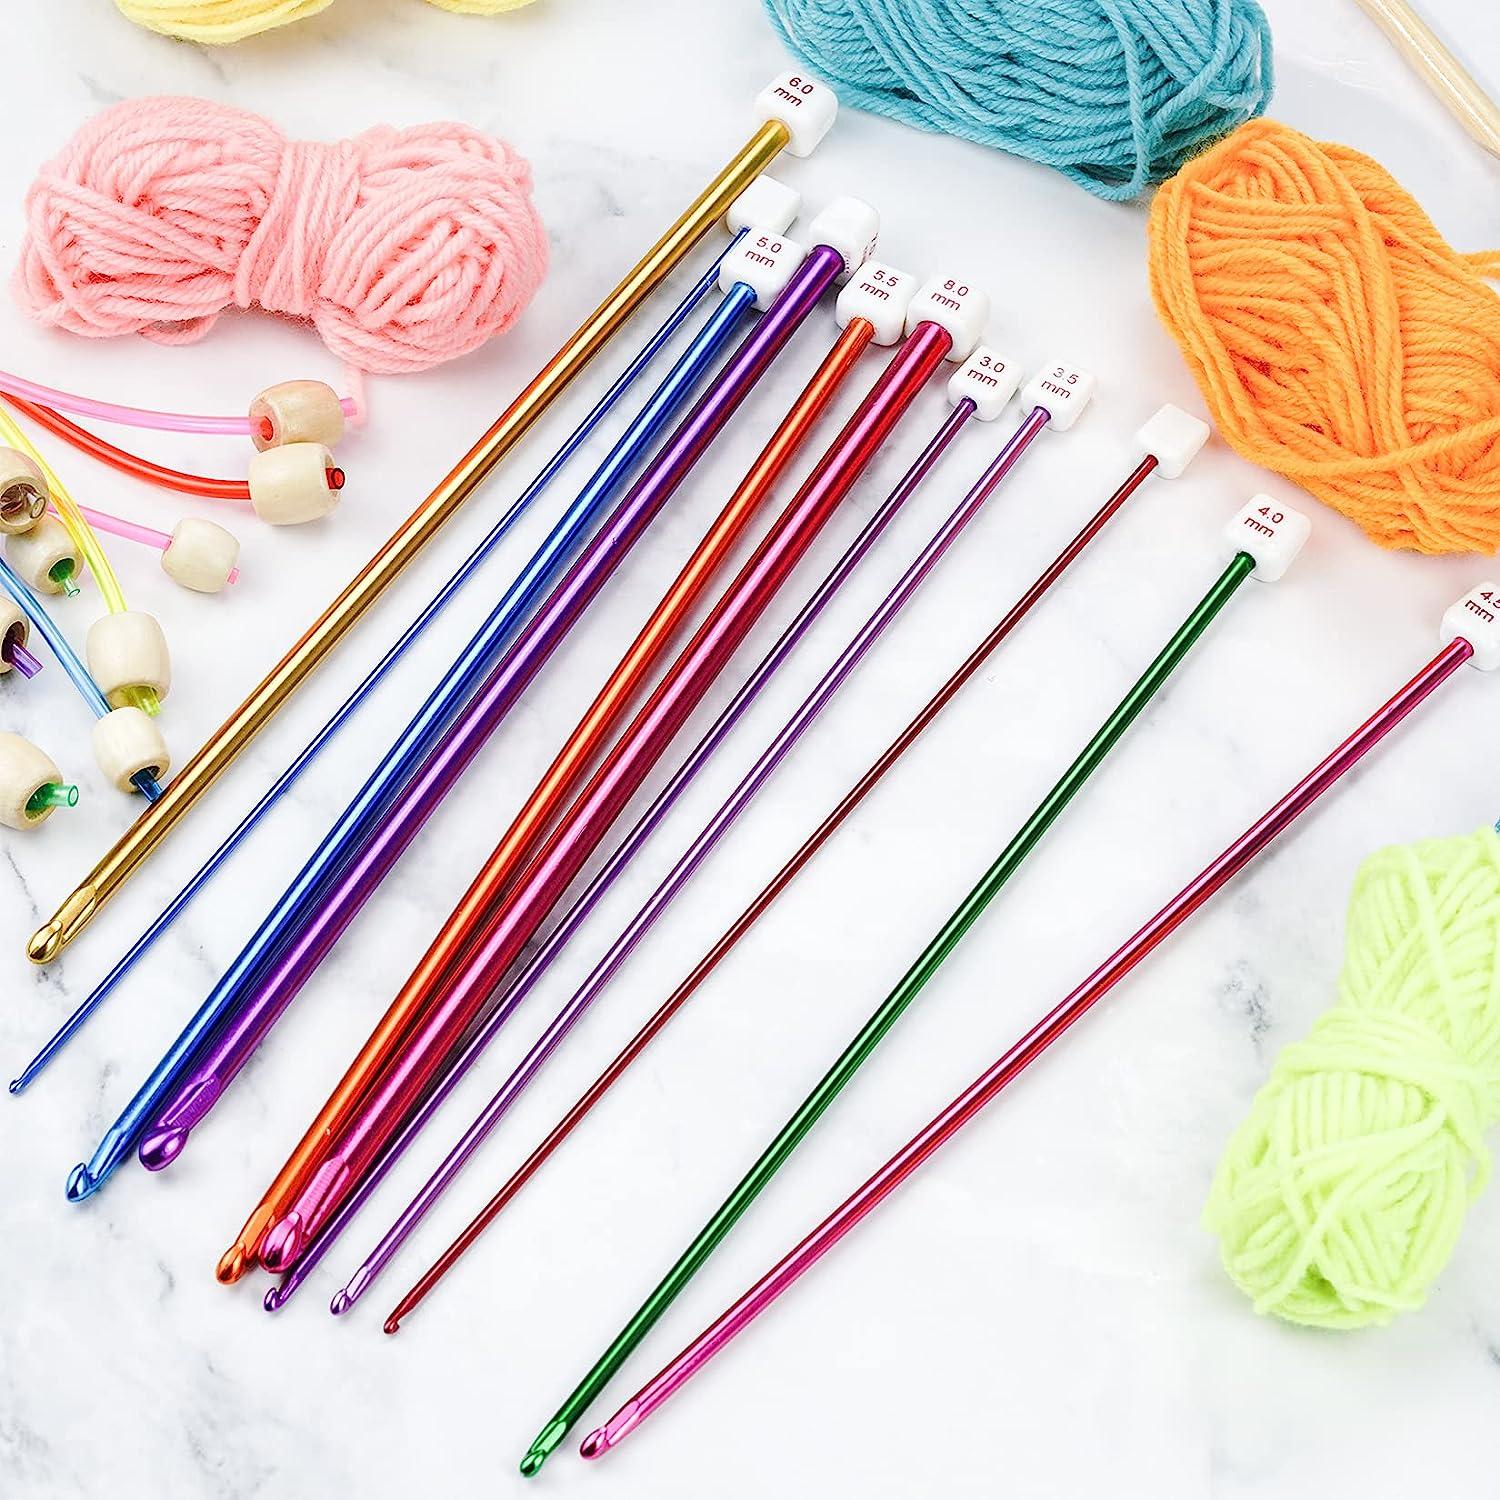 23PCS Tunisian Crochet Hooks Set 3-10mm Cable Knitting Needle comfortable  to hold, flexible to use, various colors of Tunisian - AliExpress